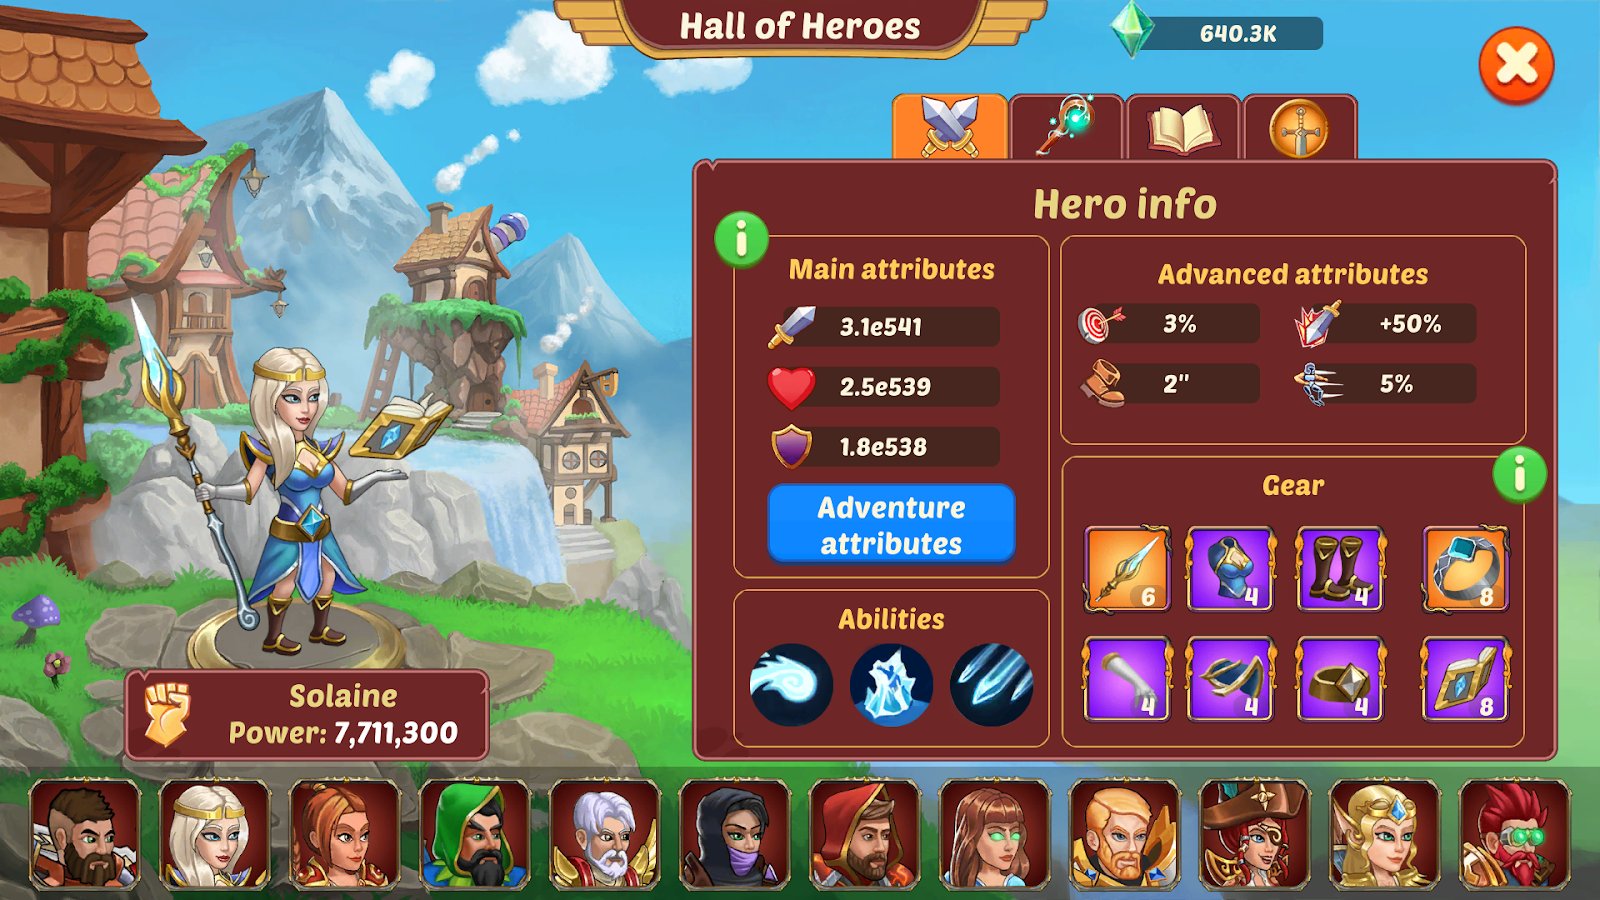 instal the last version for android Firestone Online Idle RPG